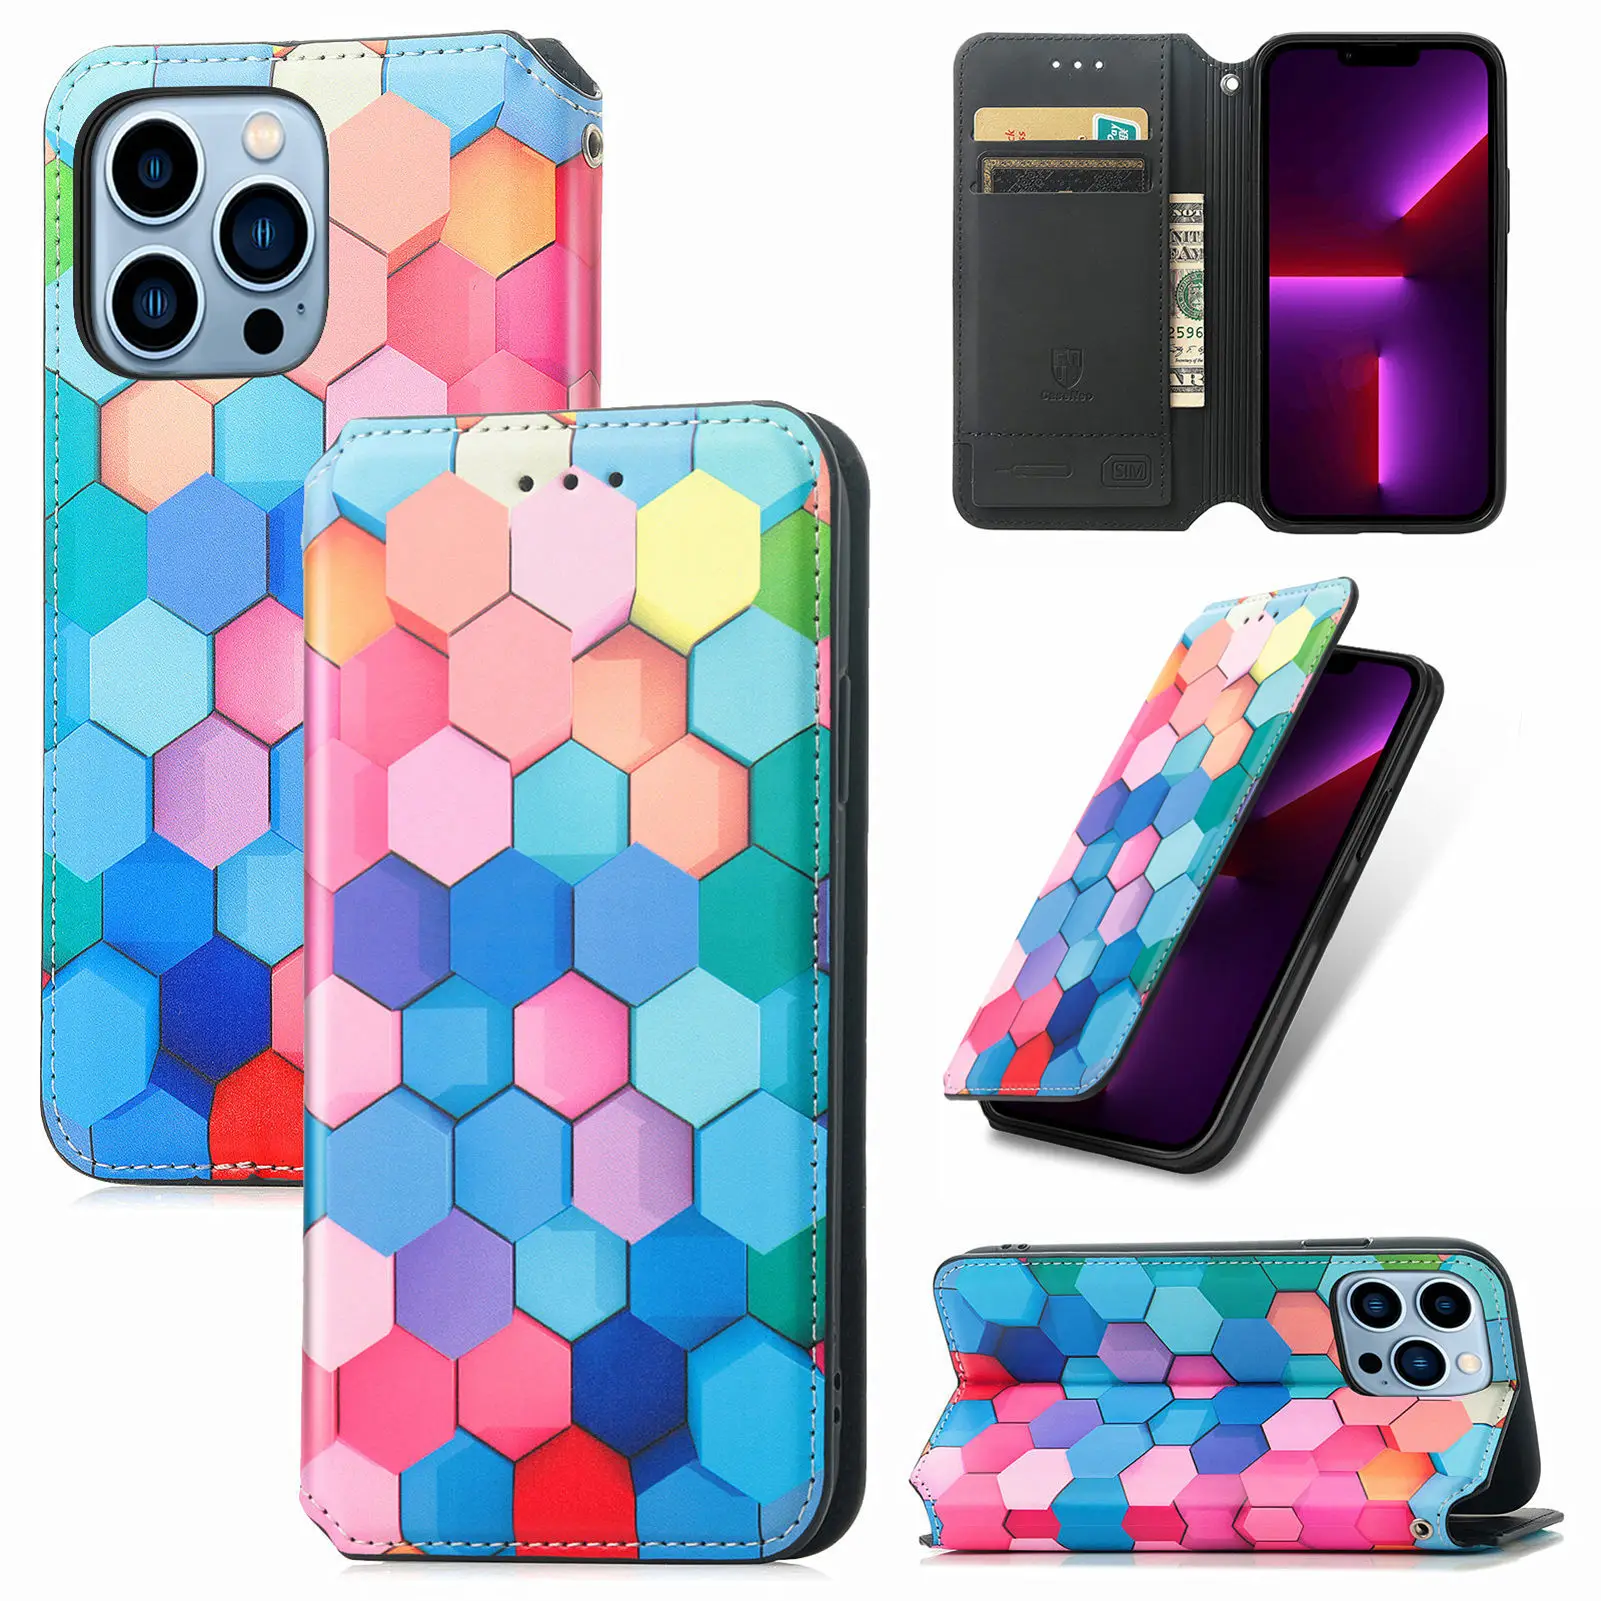 

Magnetic Colorful Leather Case For Samsung Galaxy S22 S21 S20 Ultra PLUS Fe NOTE 20 10 lite Ultra PRO 9 Graffit iphone case